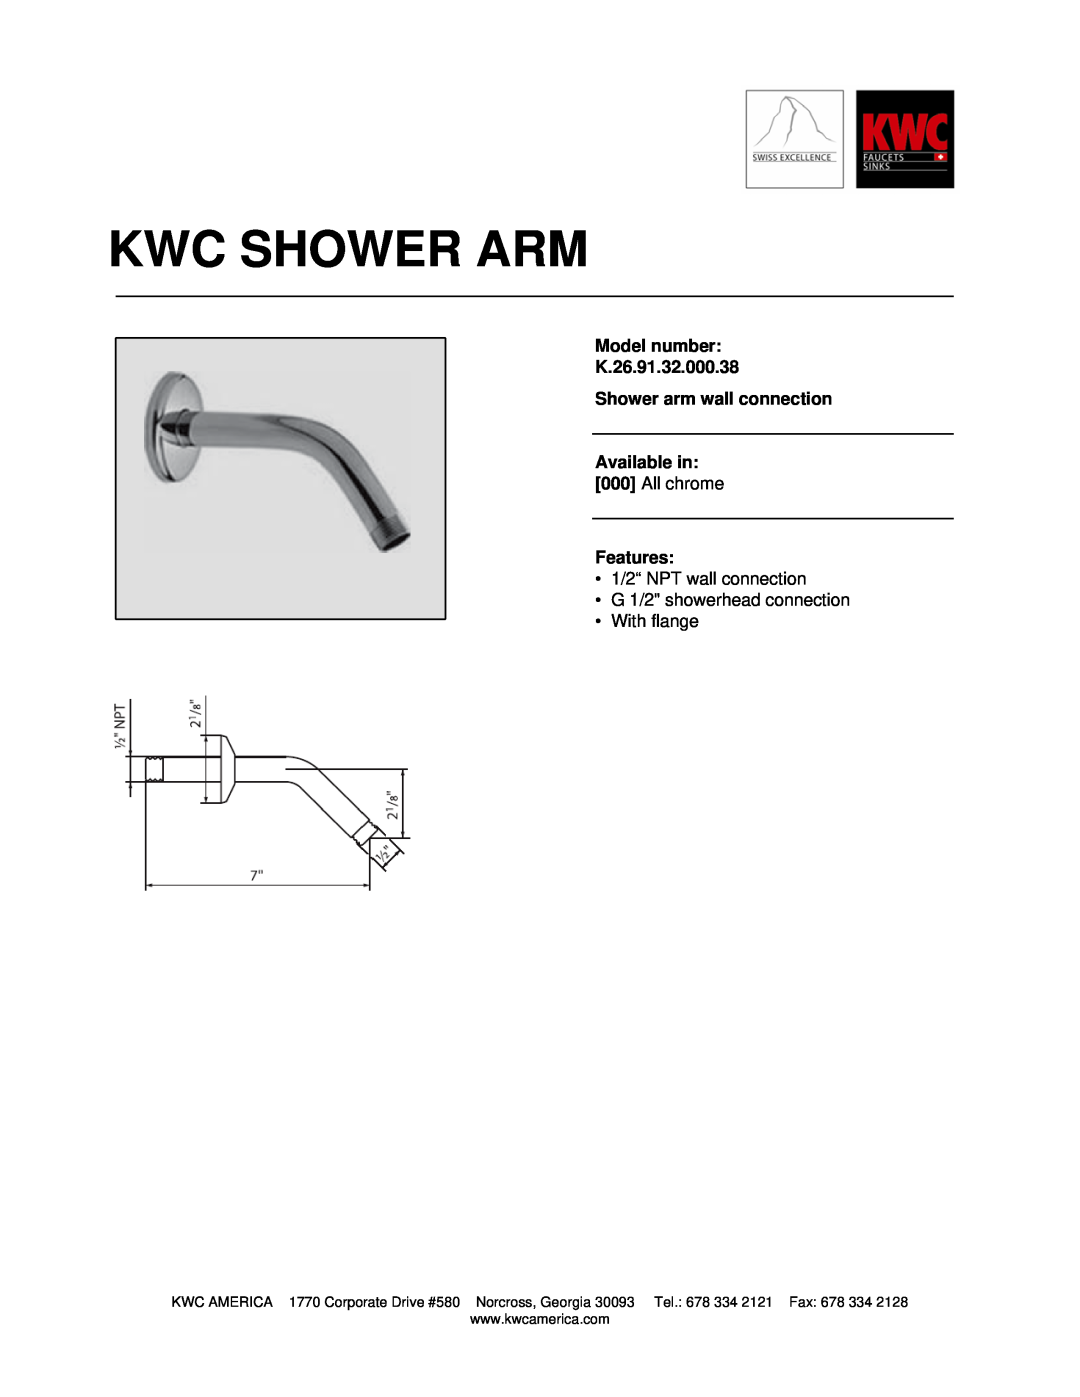 KWC manual Kwc Shower Arm, Model number K.26.91.32.000.38, Shower arm wall connection, 1/2“ NPT wall connection 